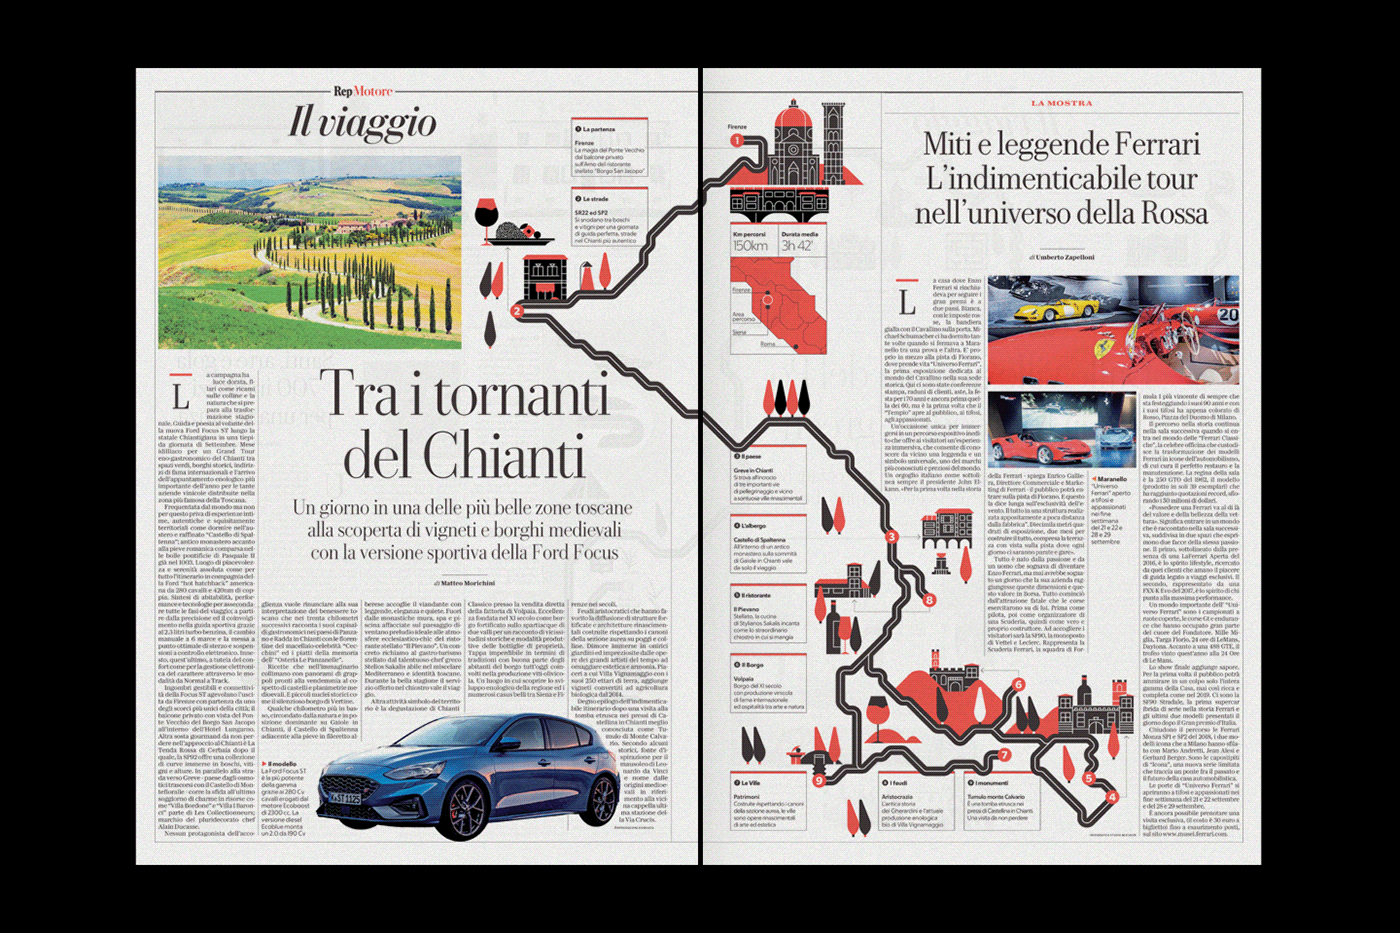 infographic maps Travel road trip lifestyle Food  Italy car